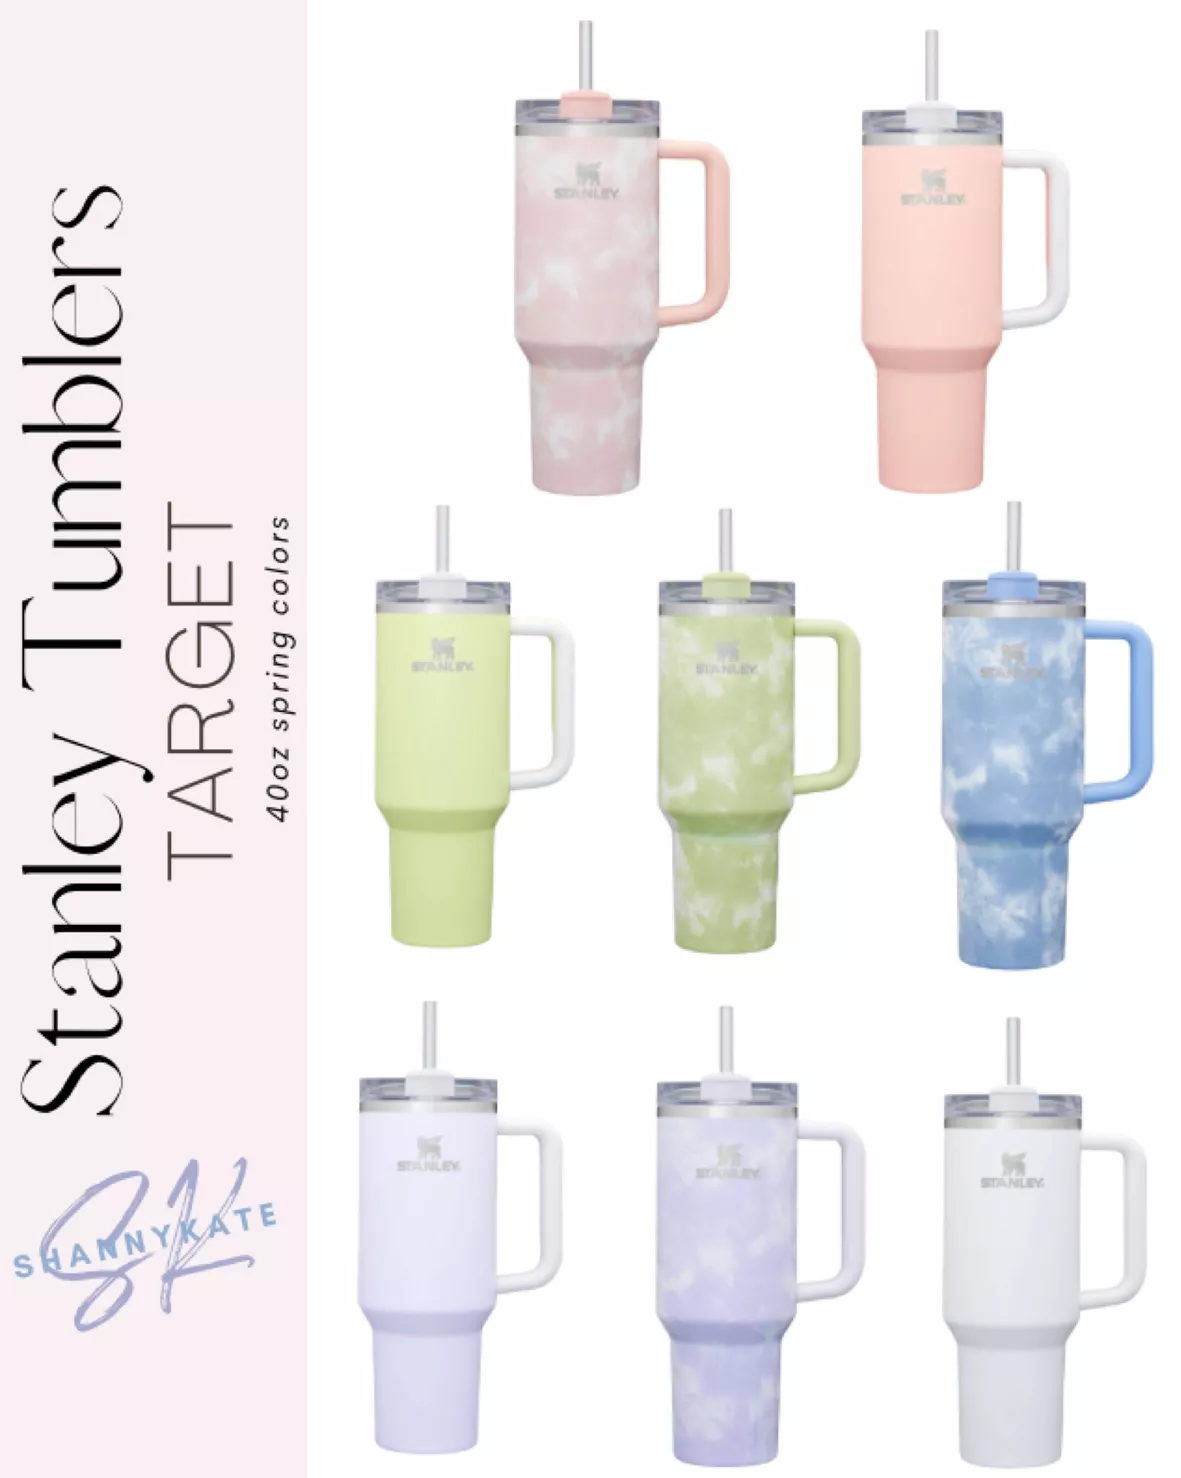 The Stanley Tie Dye Tumblers Have Been Restocked And Are Selling Fast